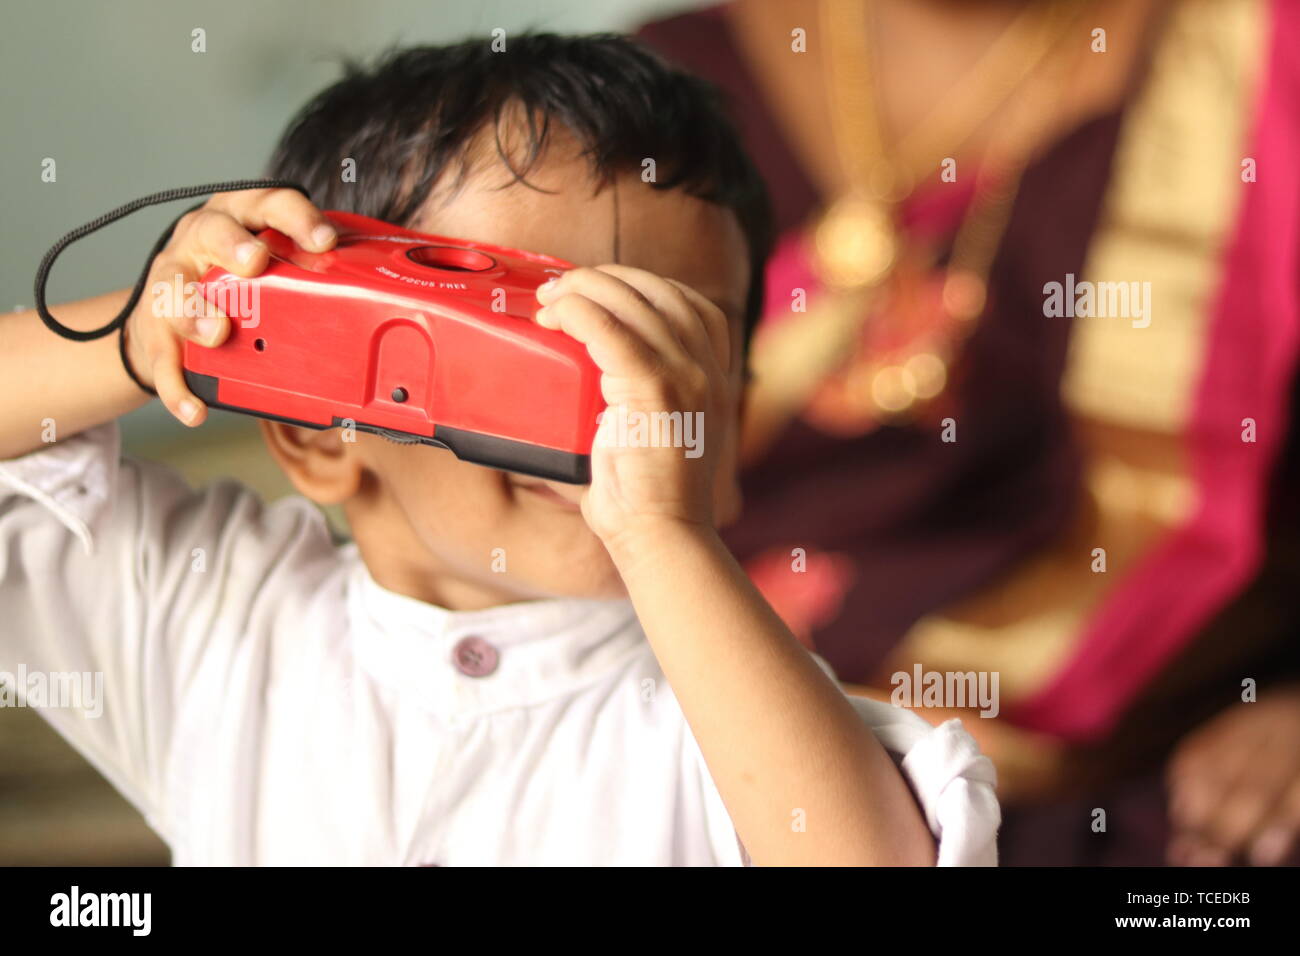 Maski, India 24 May,2019 : Little Indian kid trying to capture the photo using camera at home. Stock Photo